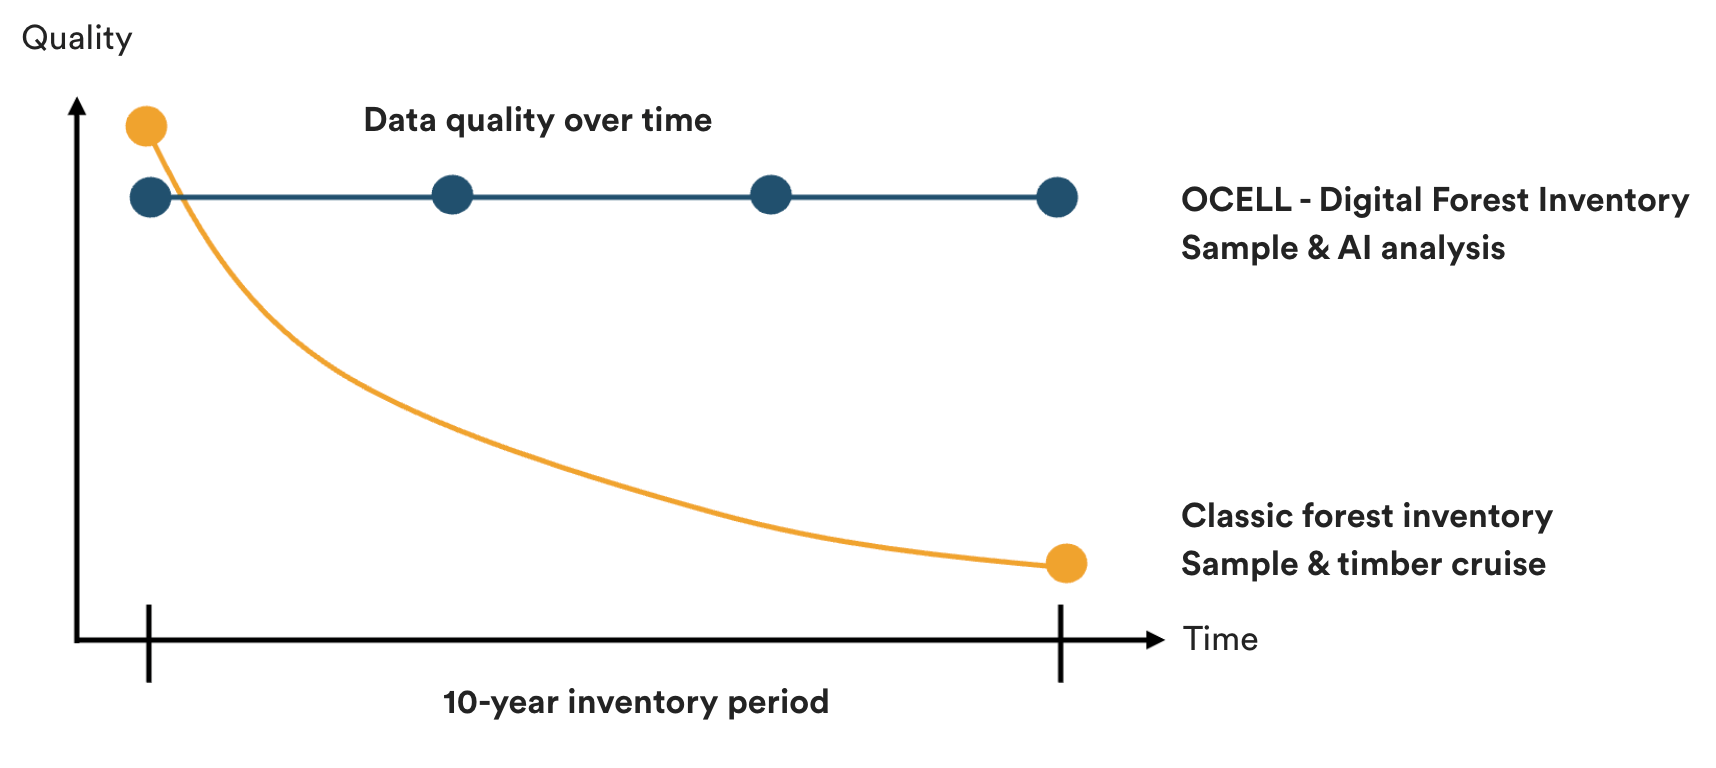 Graph visualizing the quality difference over a 10-year period between OCELL-Digital Forest Inventory and Classic forest inventory- OCELLs data quality is stable on top the entire time 